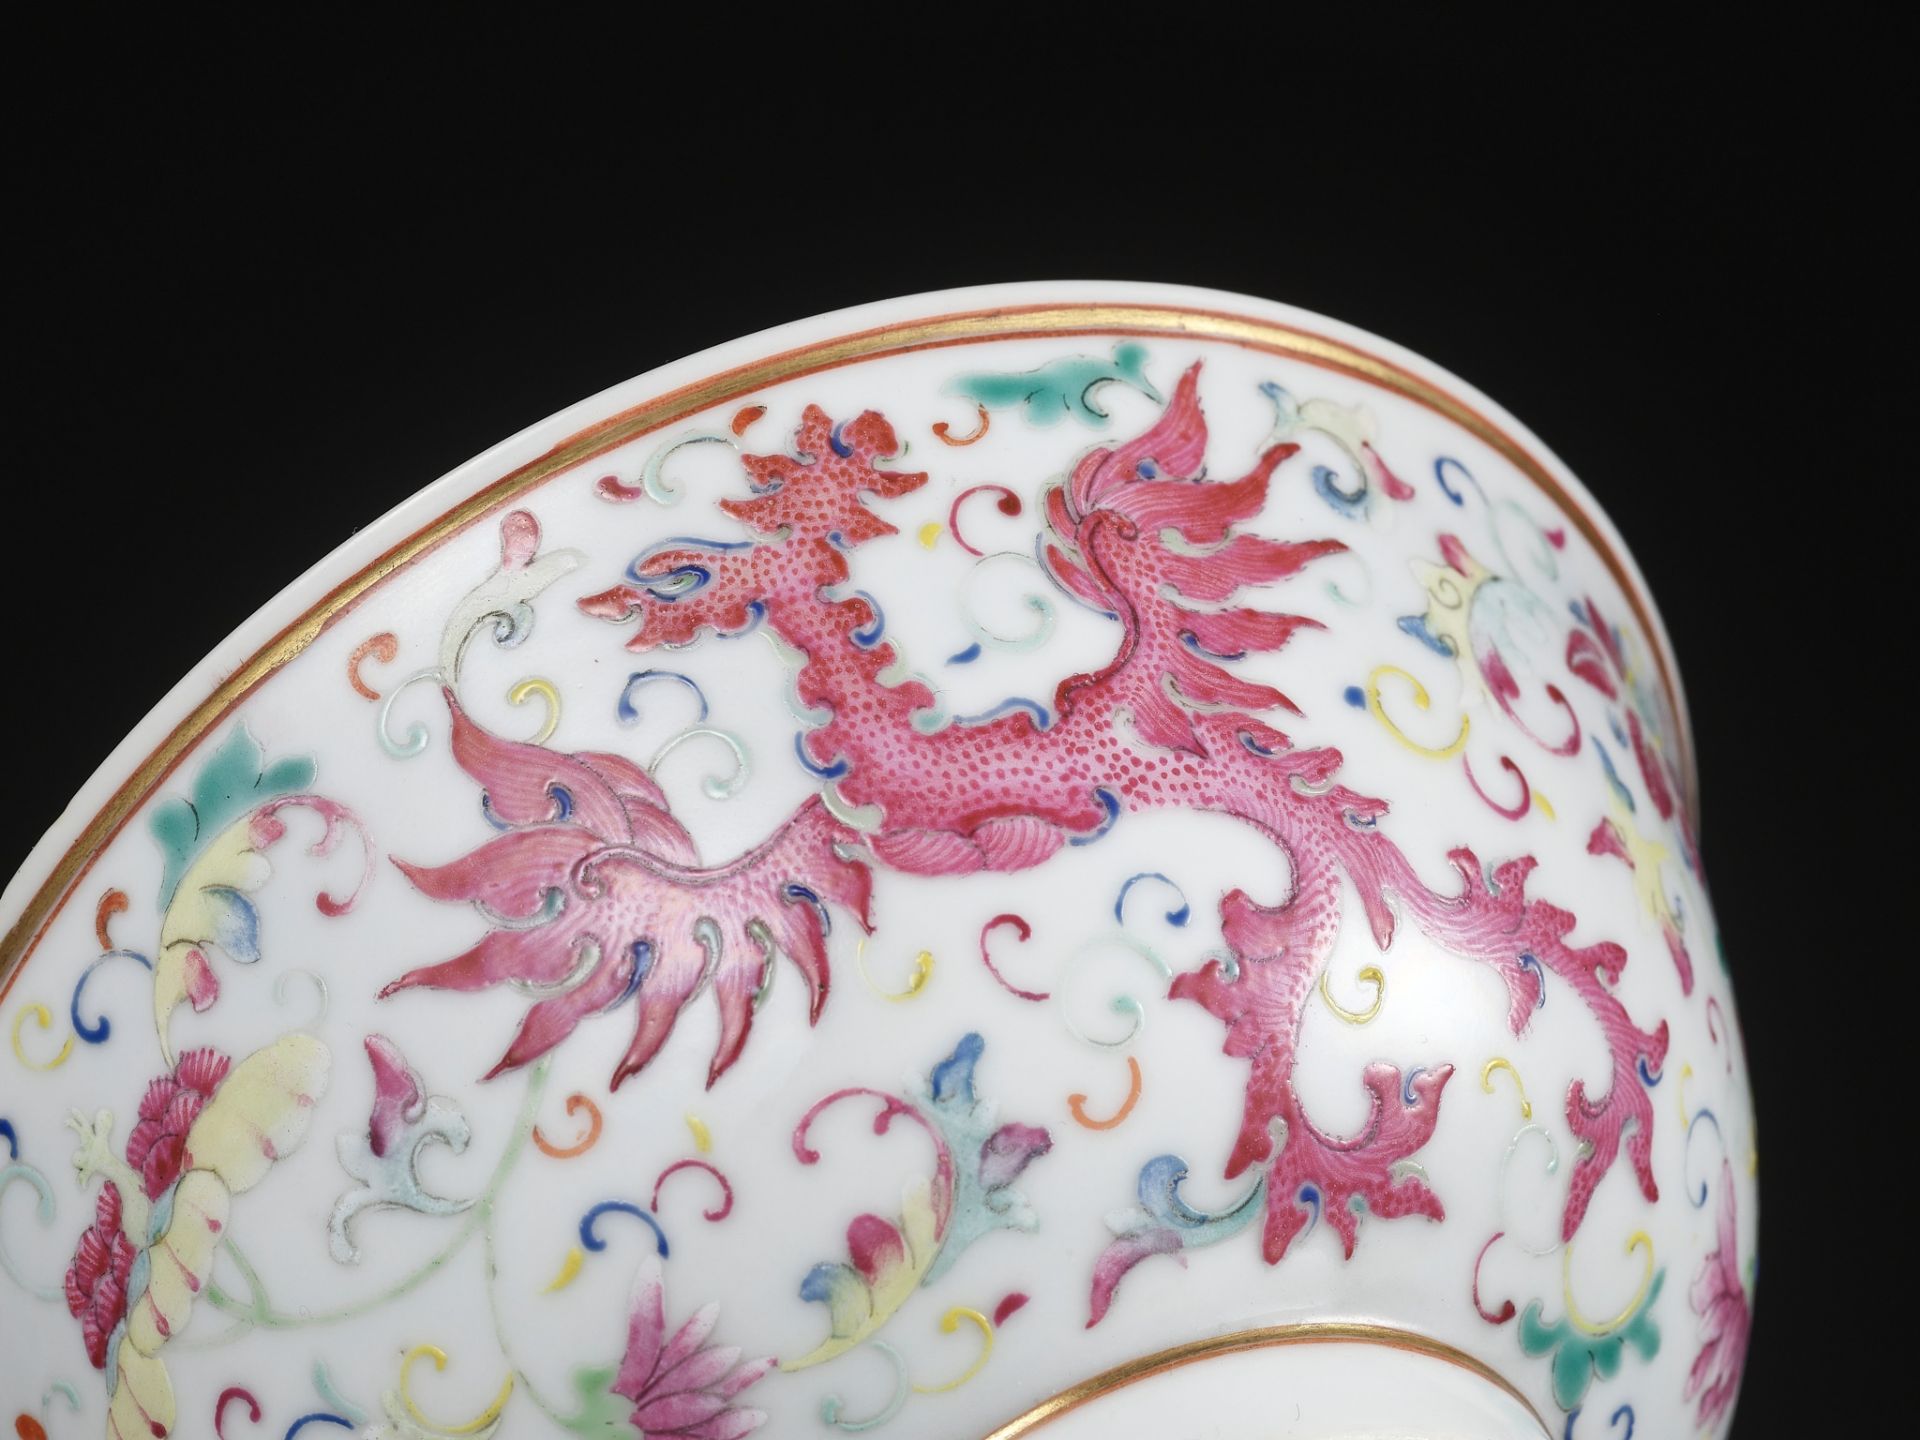 A PAIR OF FAMILLE-ROSE 'PHOENIX' BOWLS, GUANGXU MARK AND PERIOD - Image 13 of 16